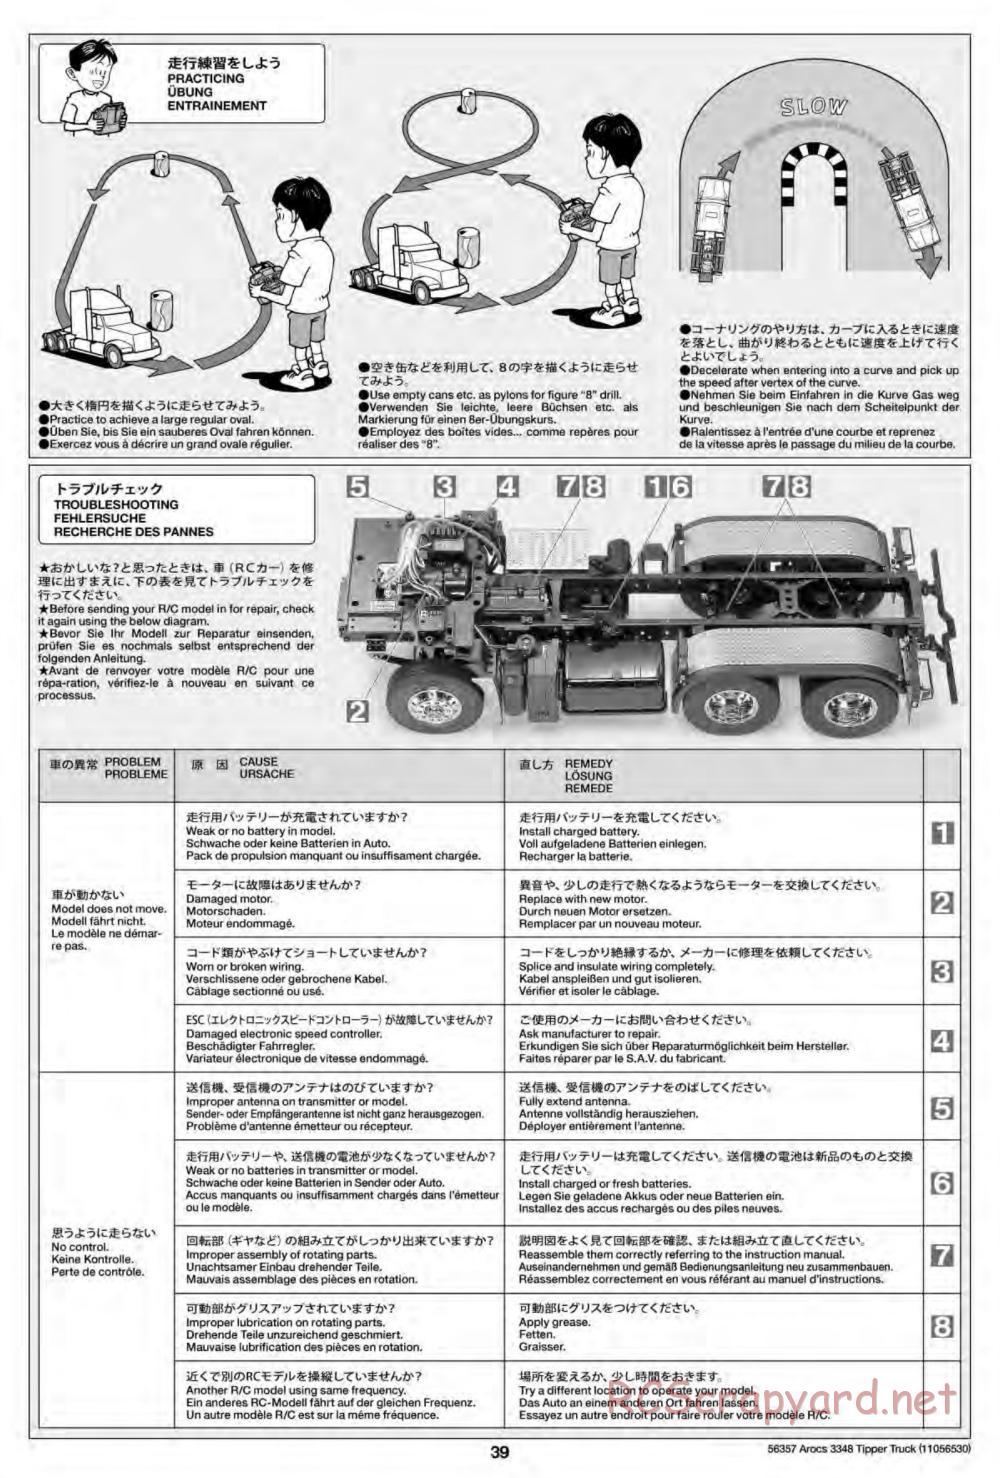 Tamiya - Mercedes-Benz Arocs 3348 6x4 Tipper Truck Chassis - Manual - Page 39